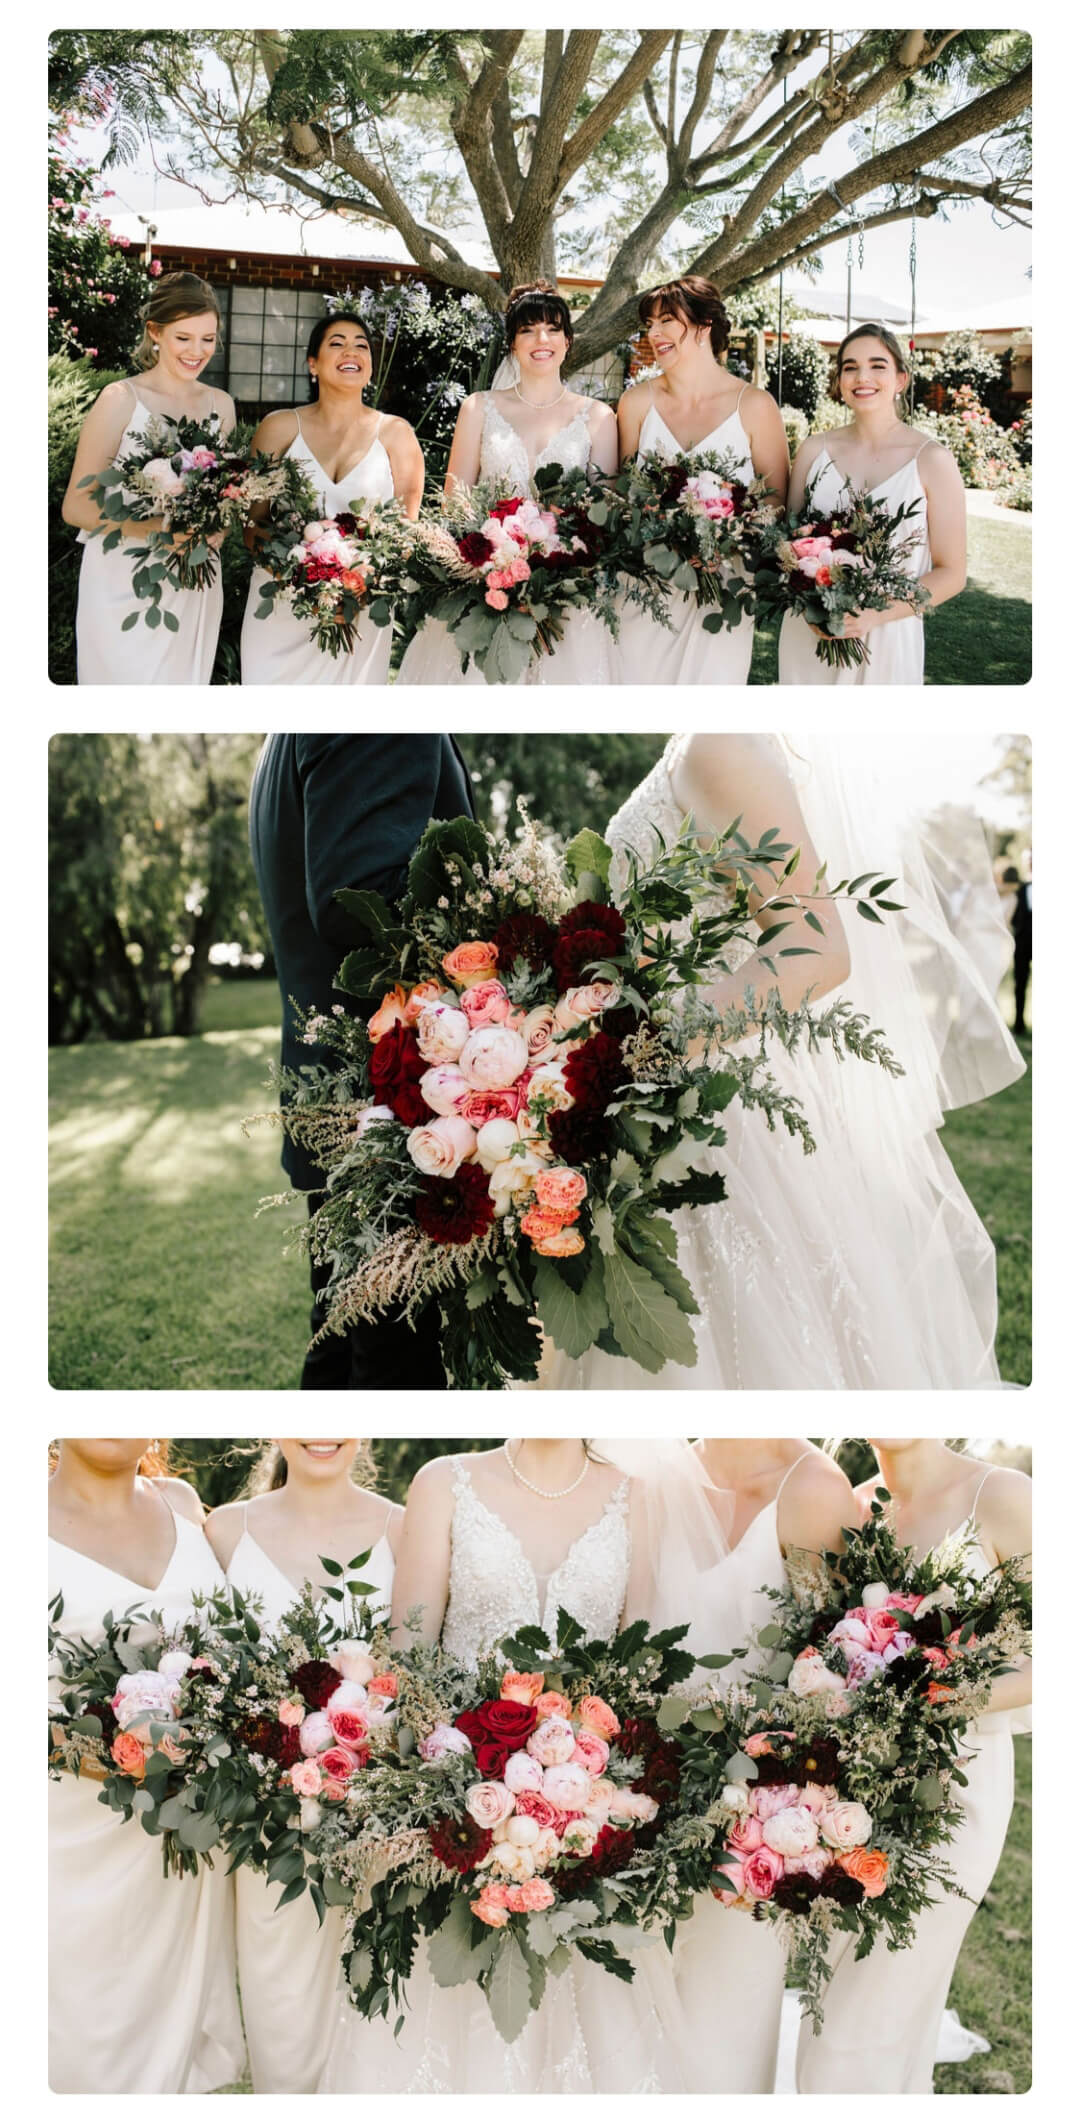 3 images of wedding bouquets, stacked on top of each other